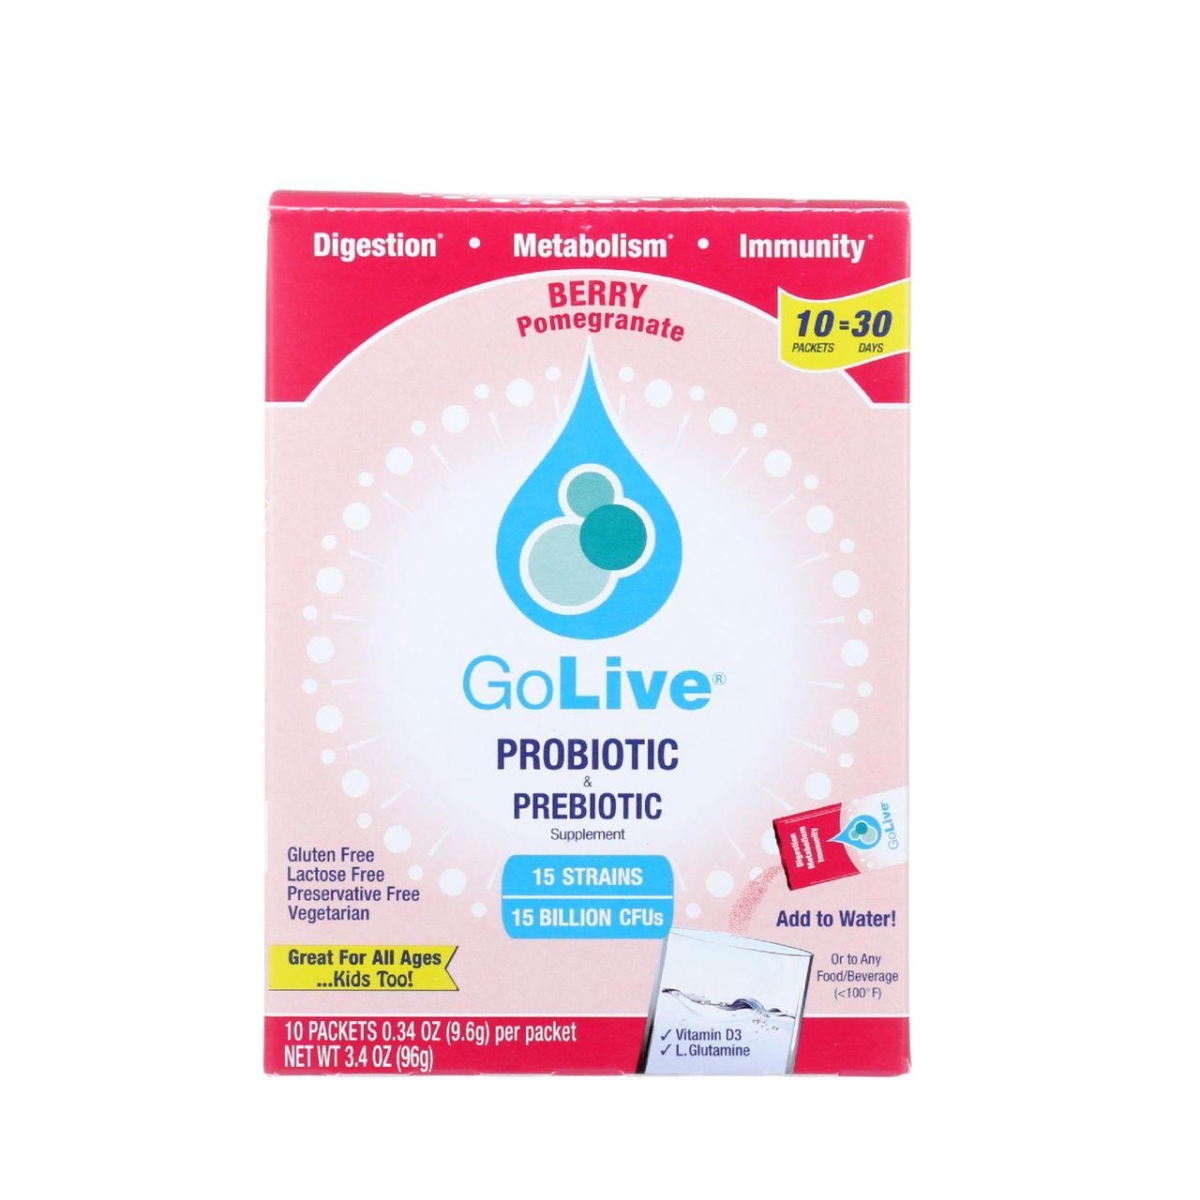 Hg0945345 0.47 Oz Probiotic & Prebiotic Flavored Packets - Berry Pomegranate